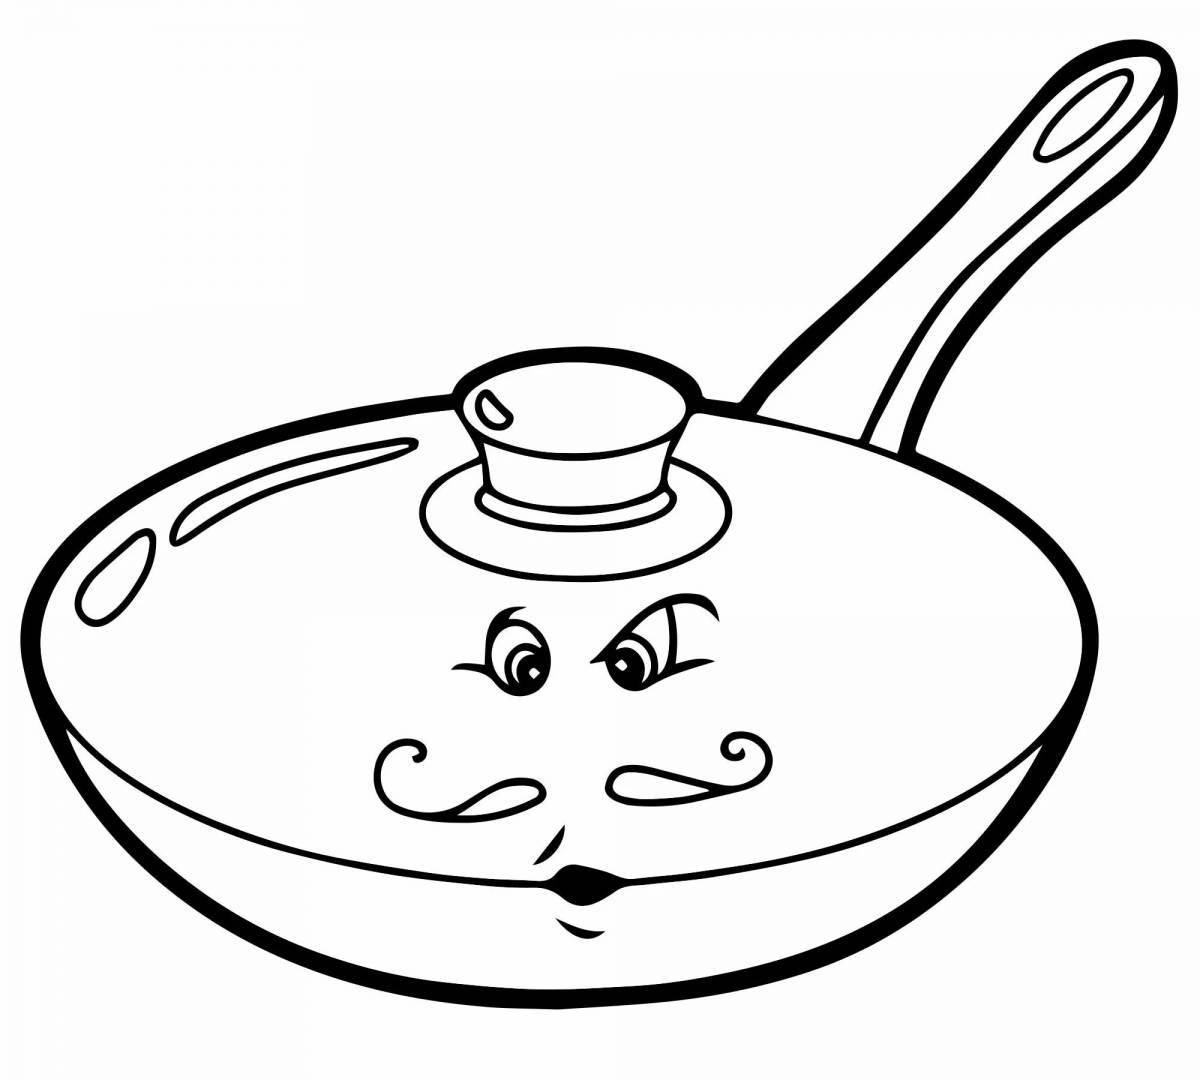 Nice frying pan coloring page for kids